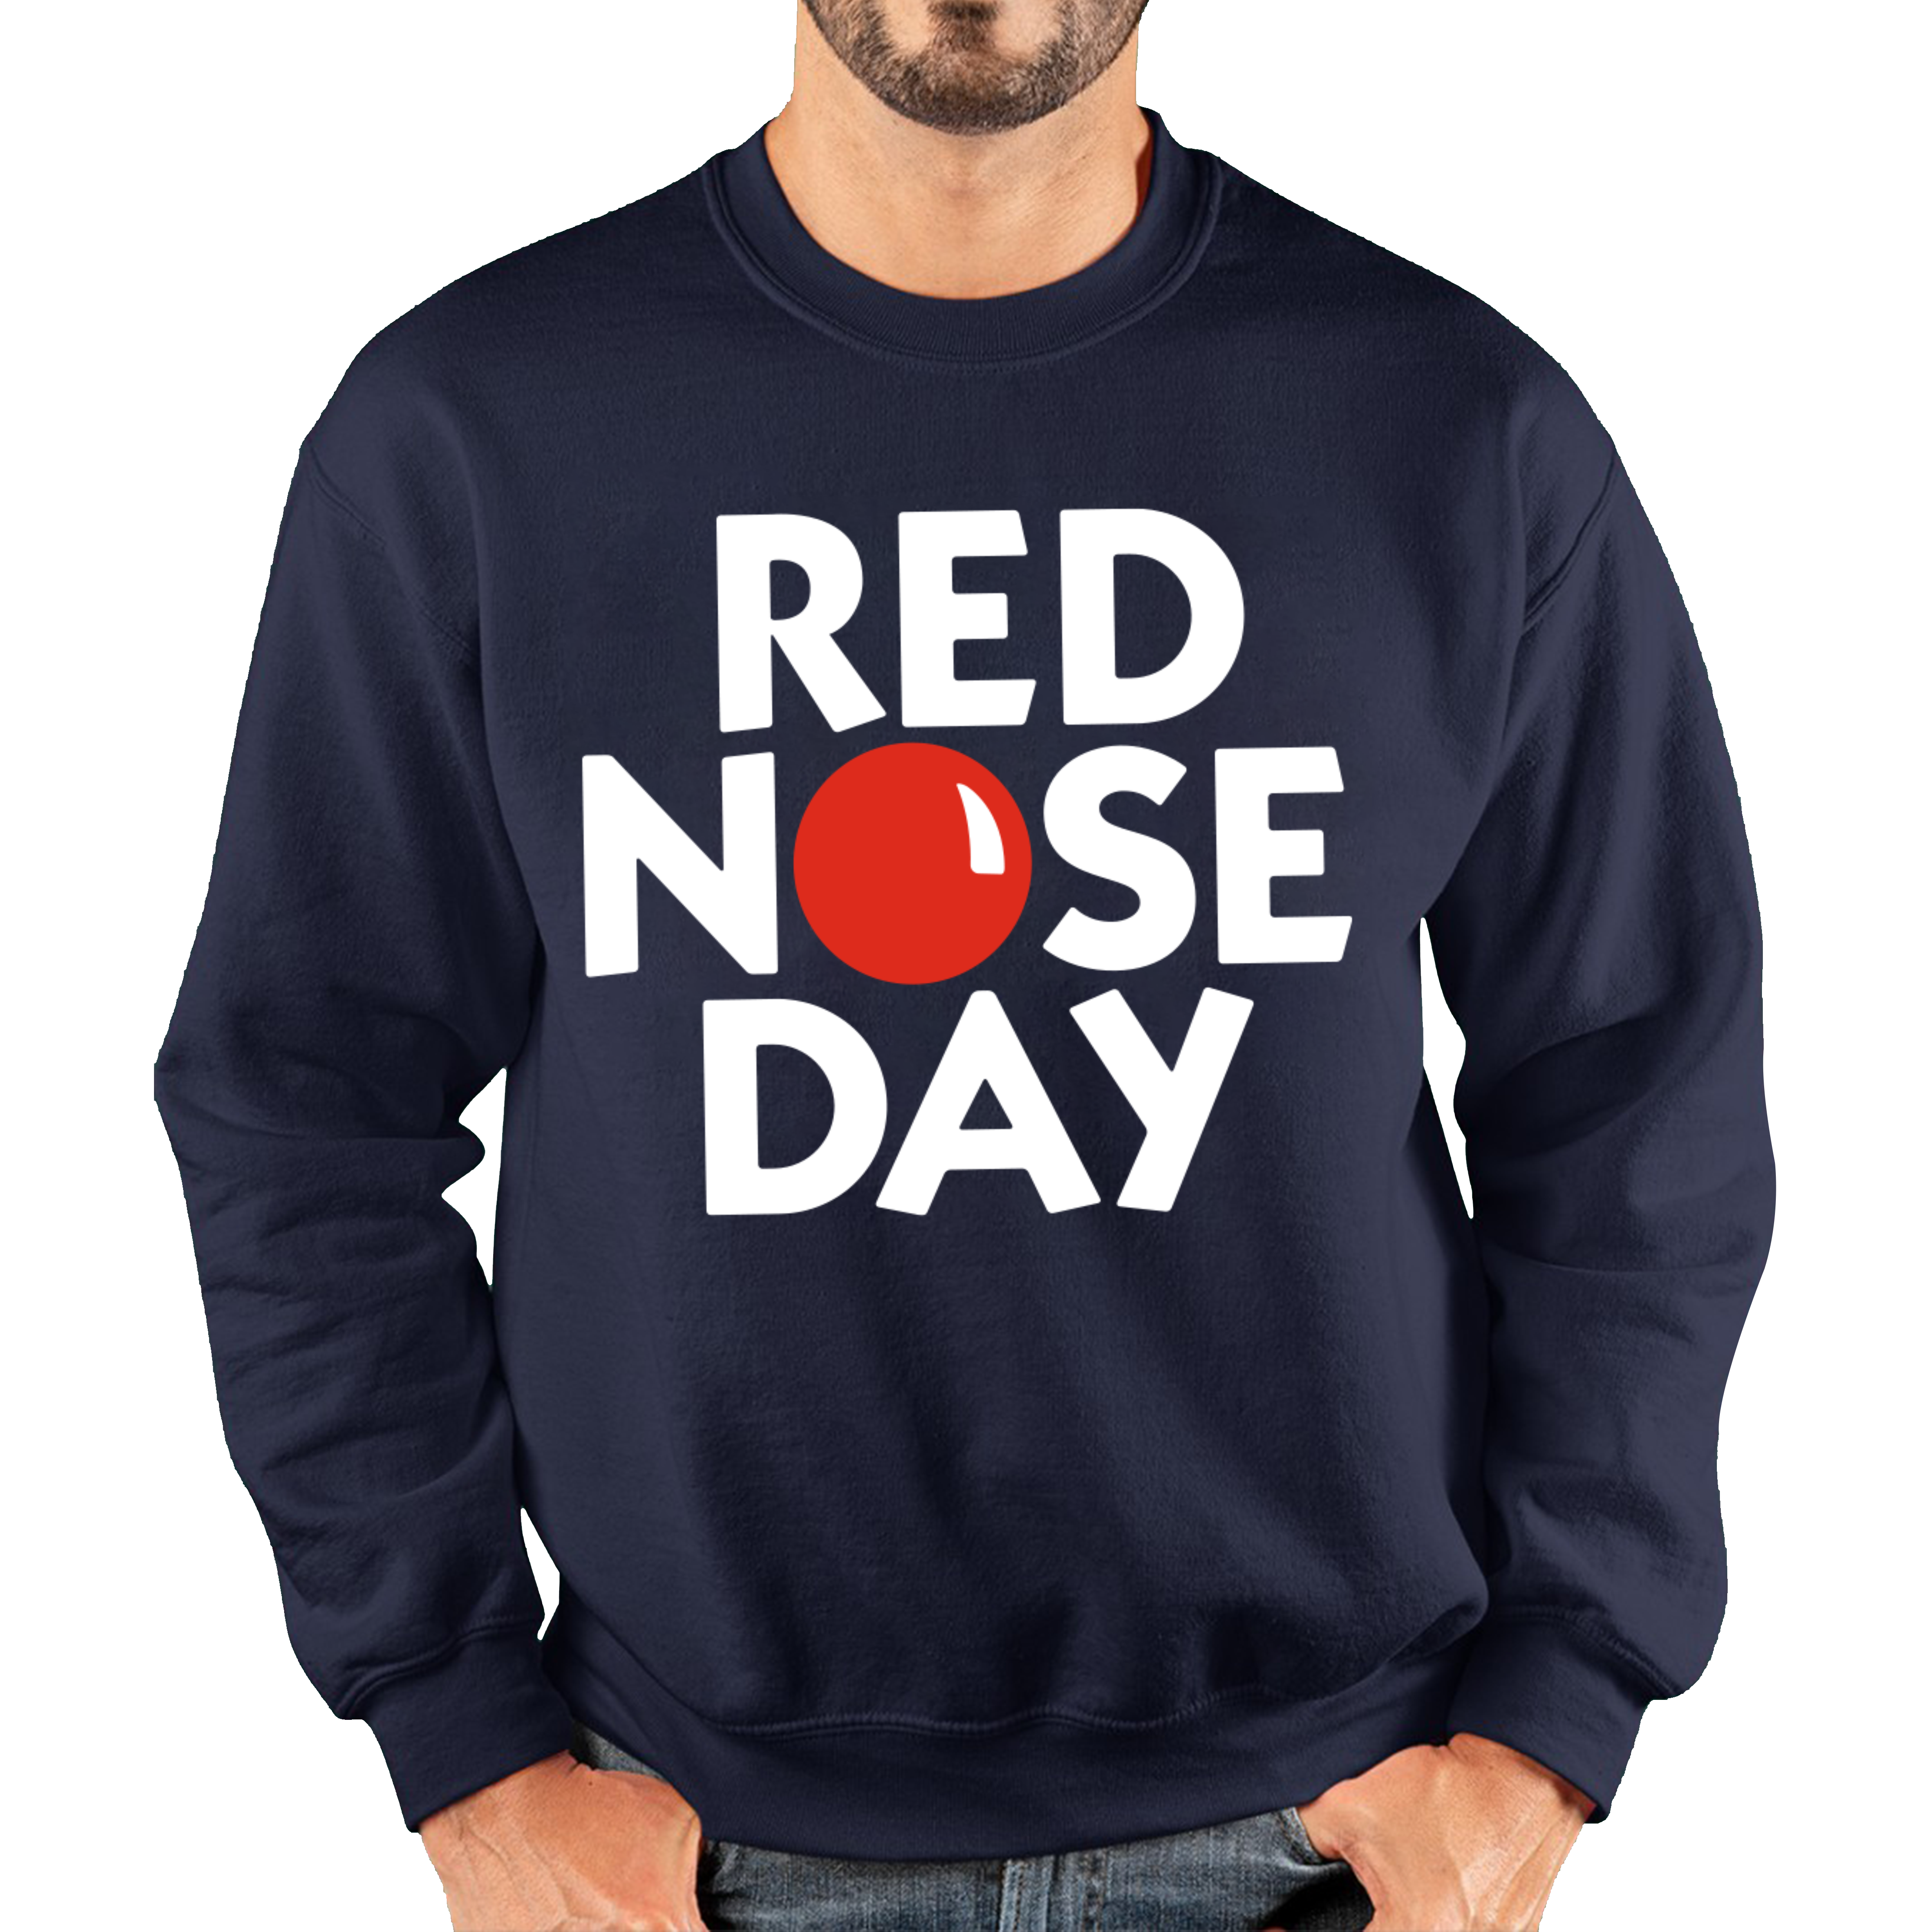 Red Nose Day Adult Sweatshirt. 50% Goes To Charity